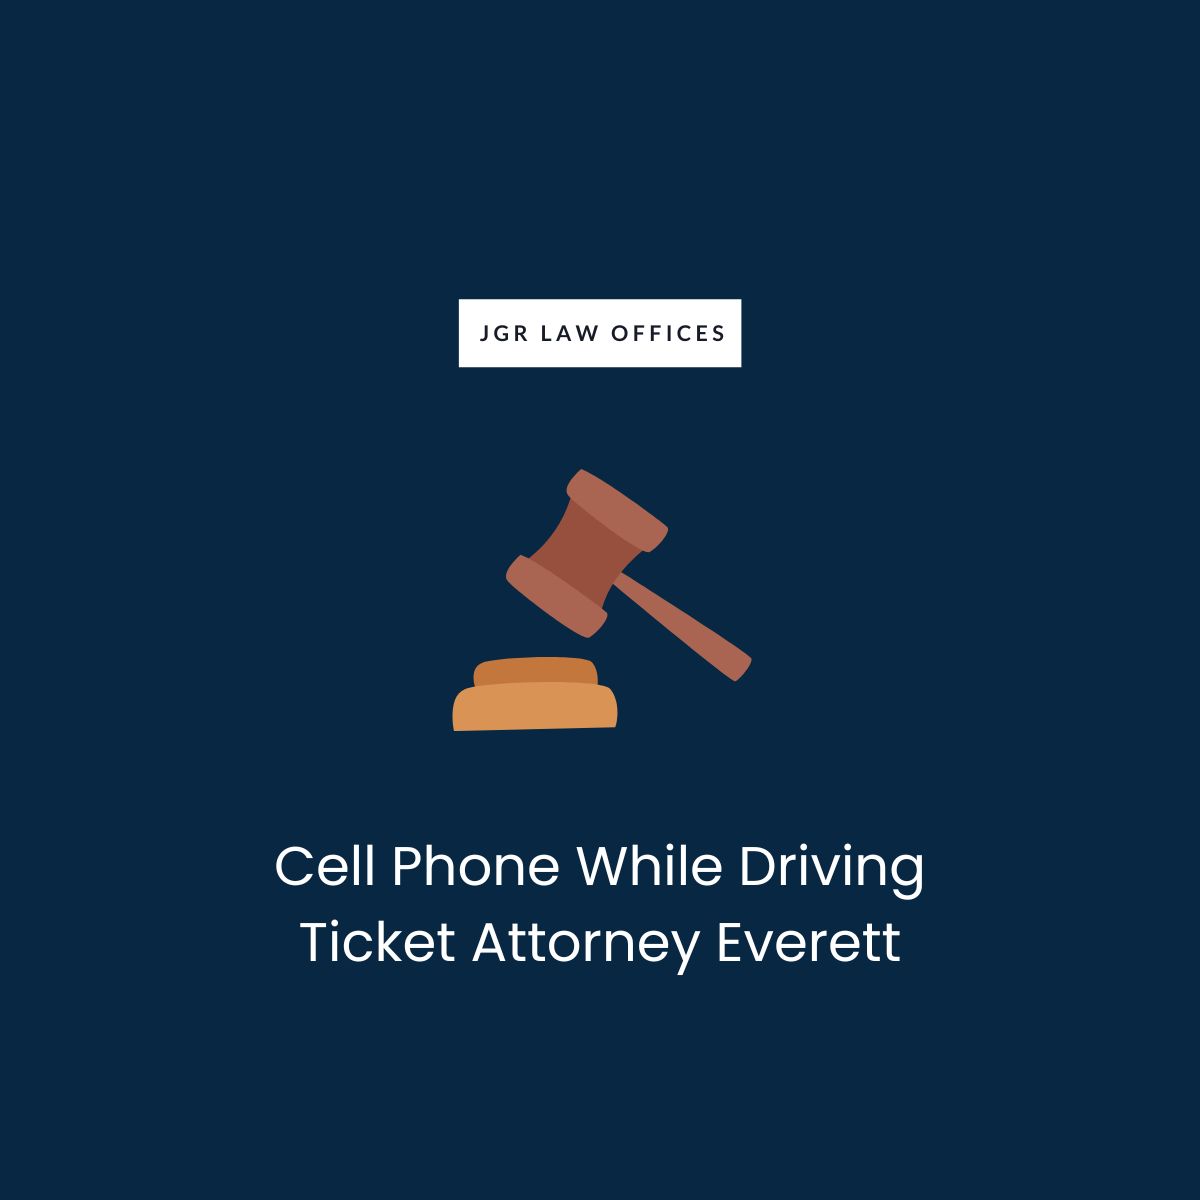 Cell Phone While Driving Ticket Attorney Everett